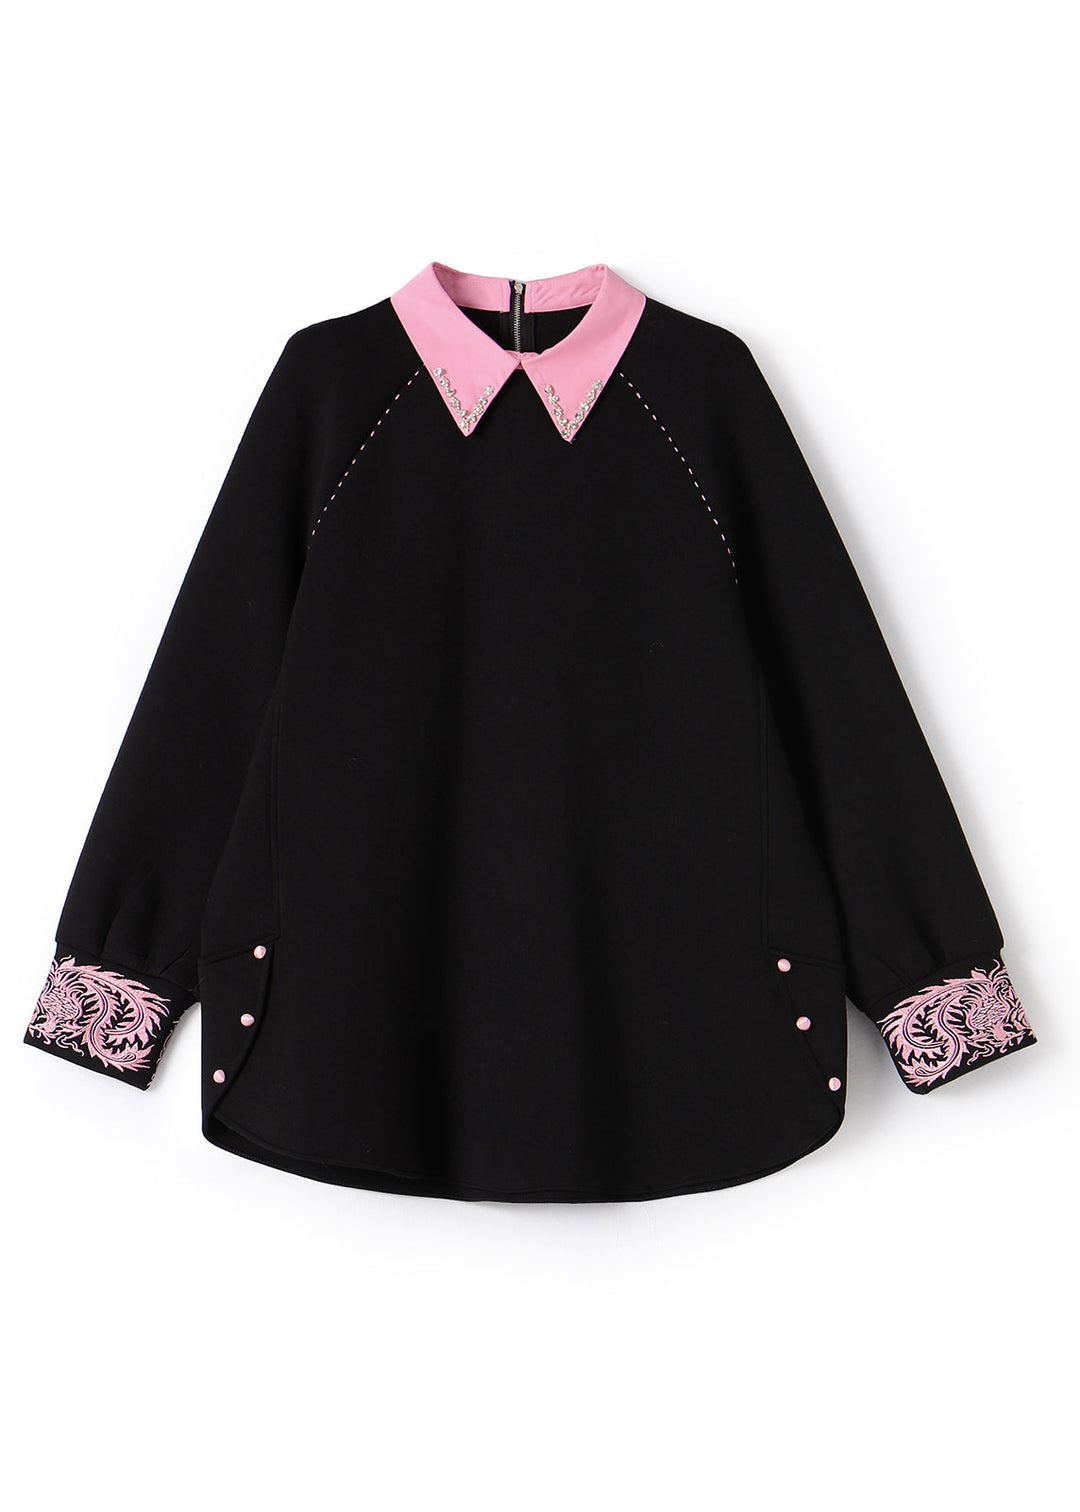 French Black Embroideried Patchwork Cotton Sweatshirts Spring